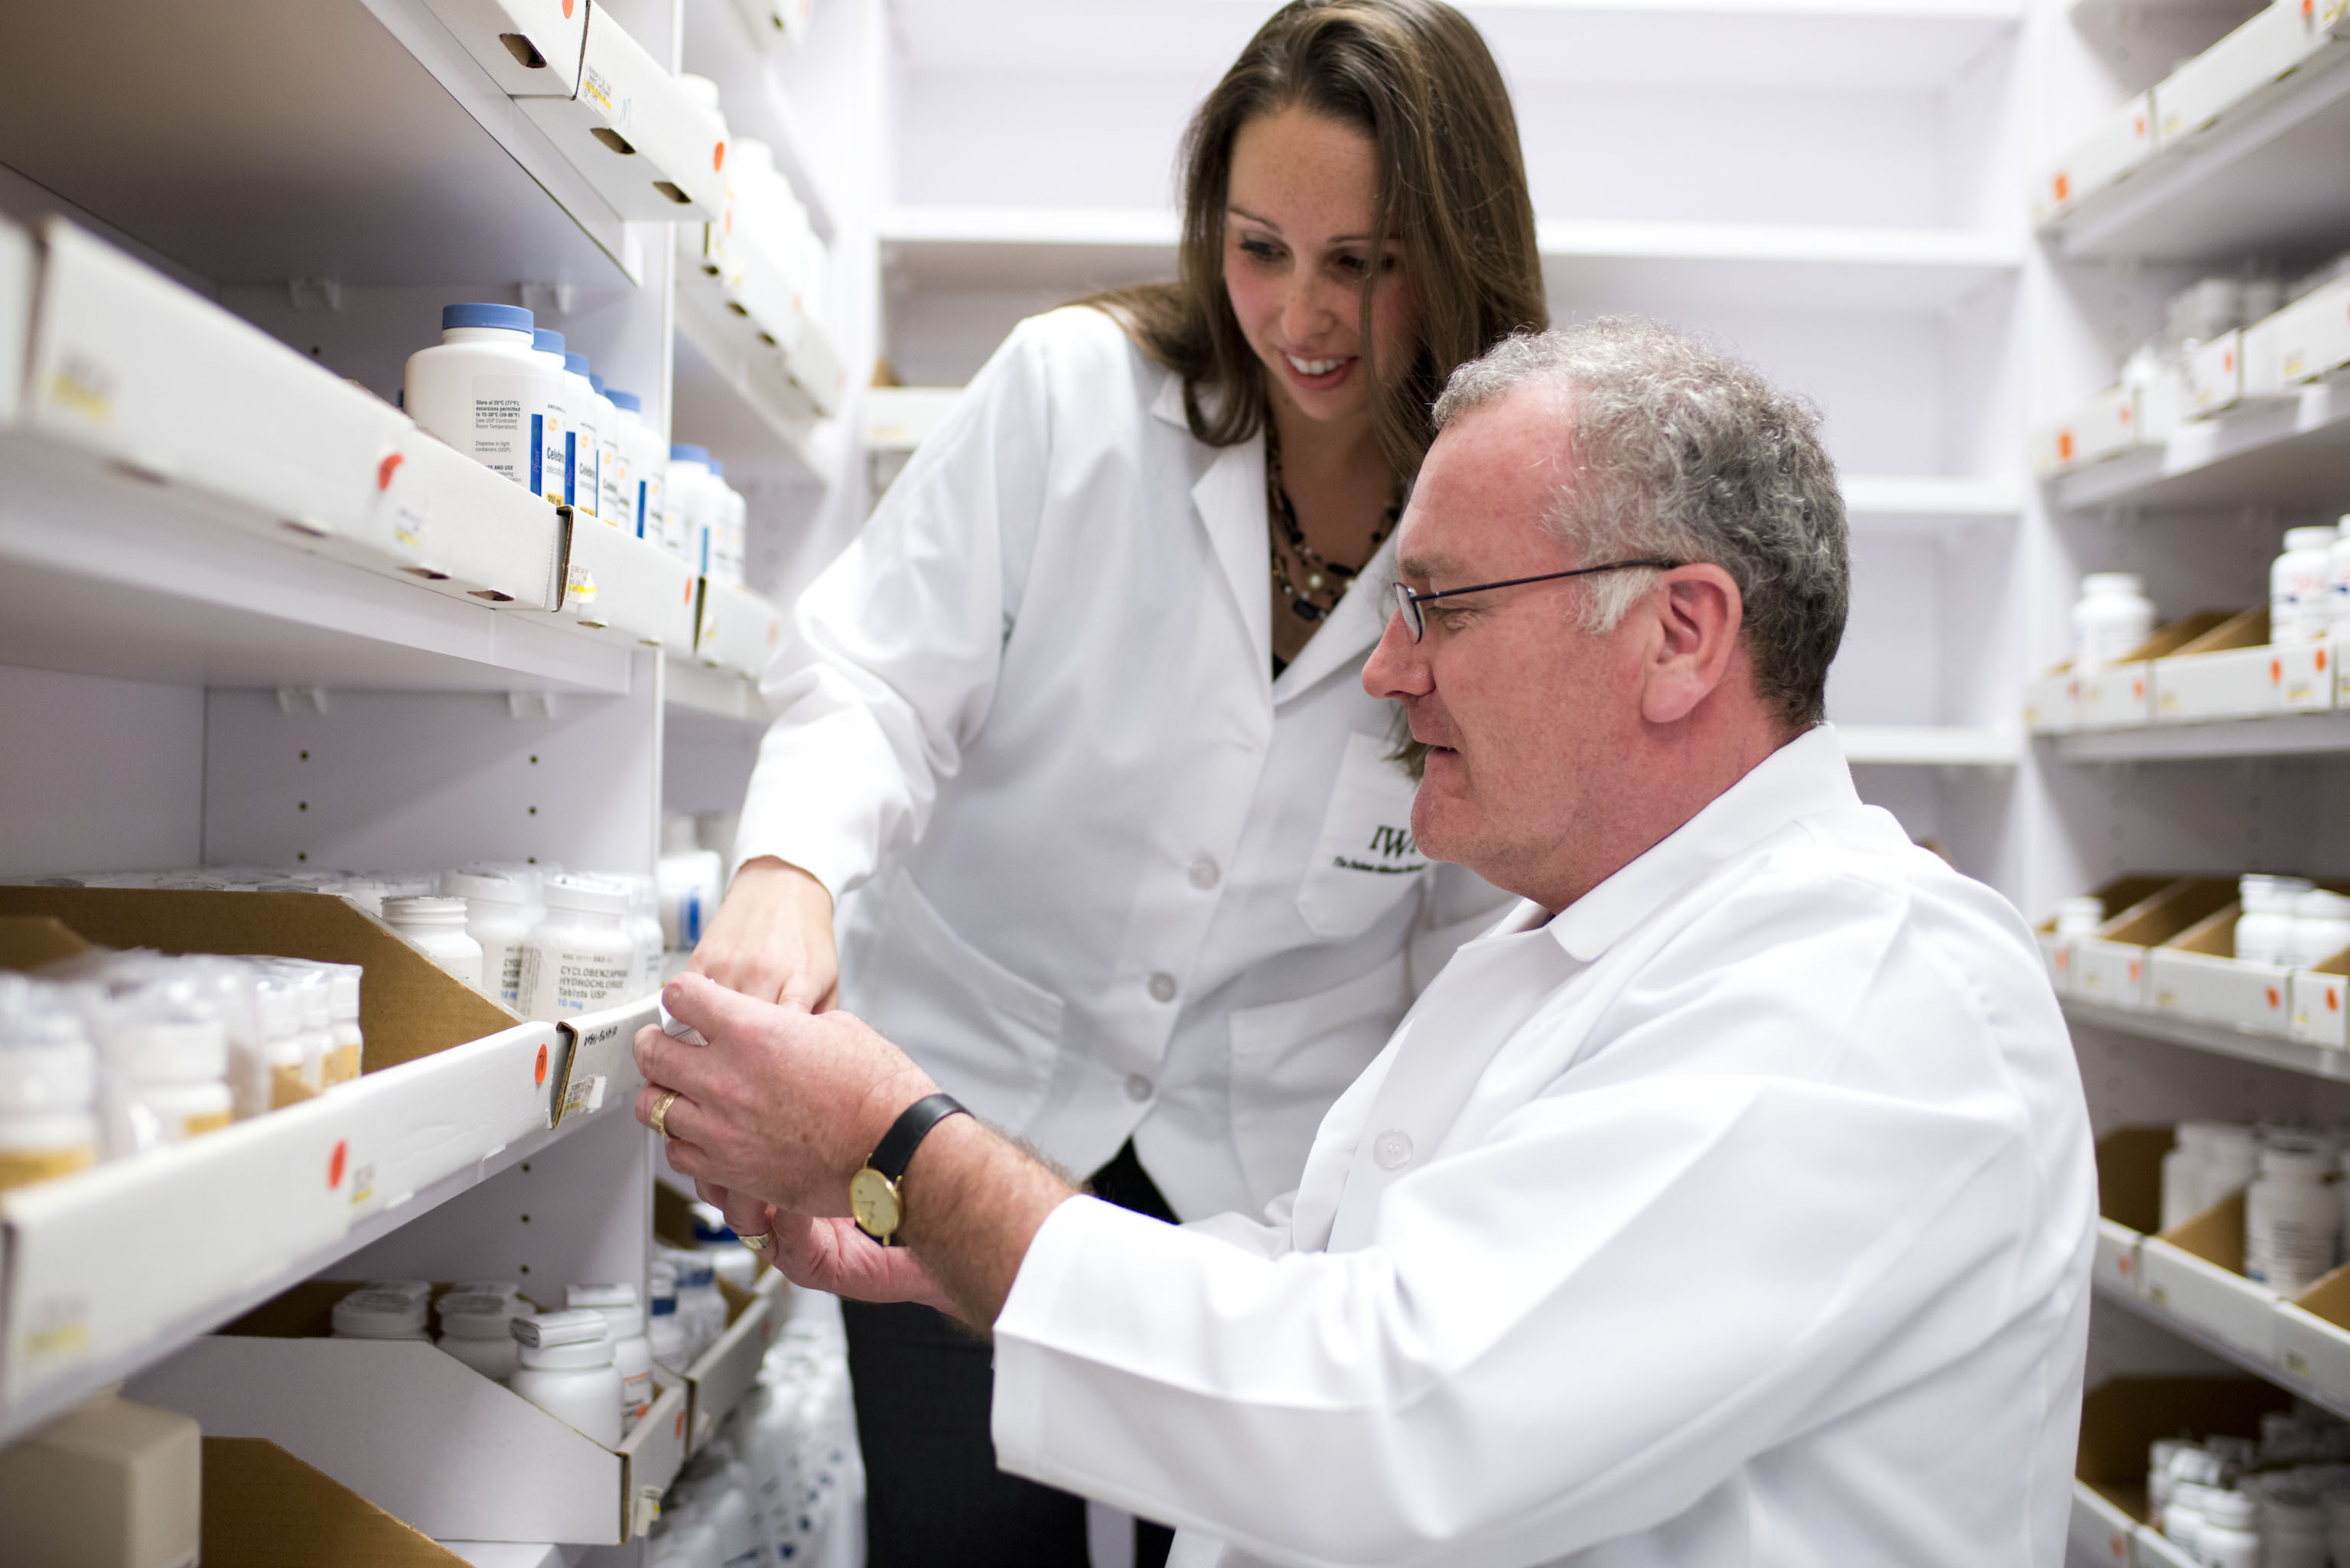 5 Reasons to Have a Pharmacist as Part of Your Treatment Team